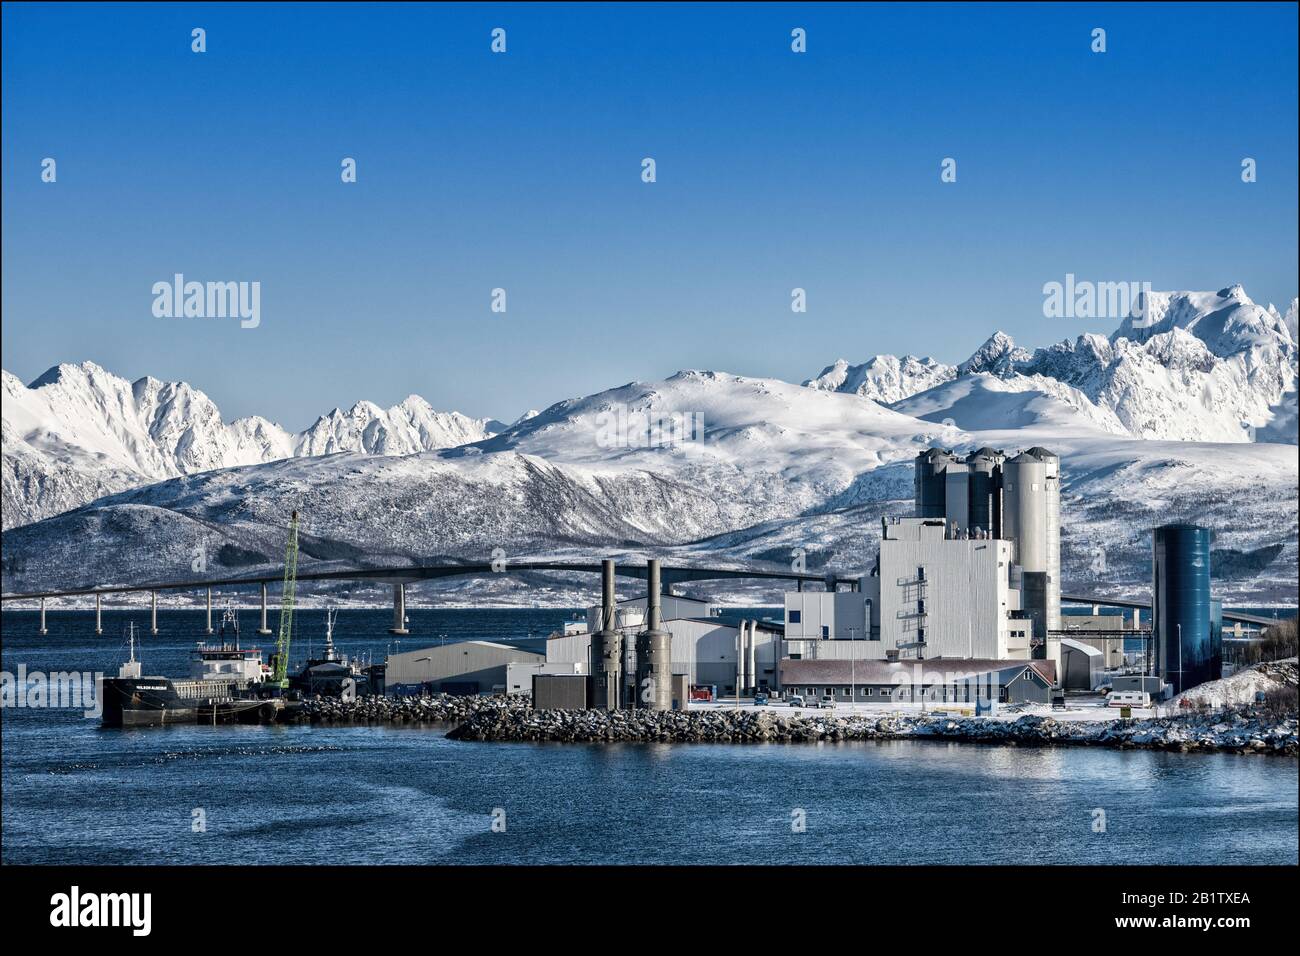 Factory in Norway with a moored barge, a bridge and snow covered mountains in the background. Stock Photo